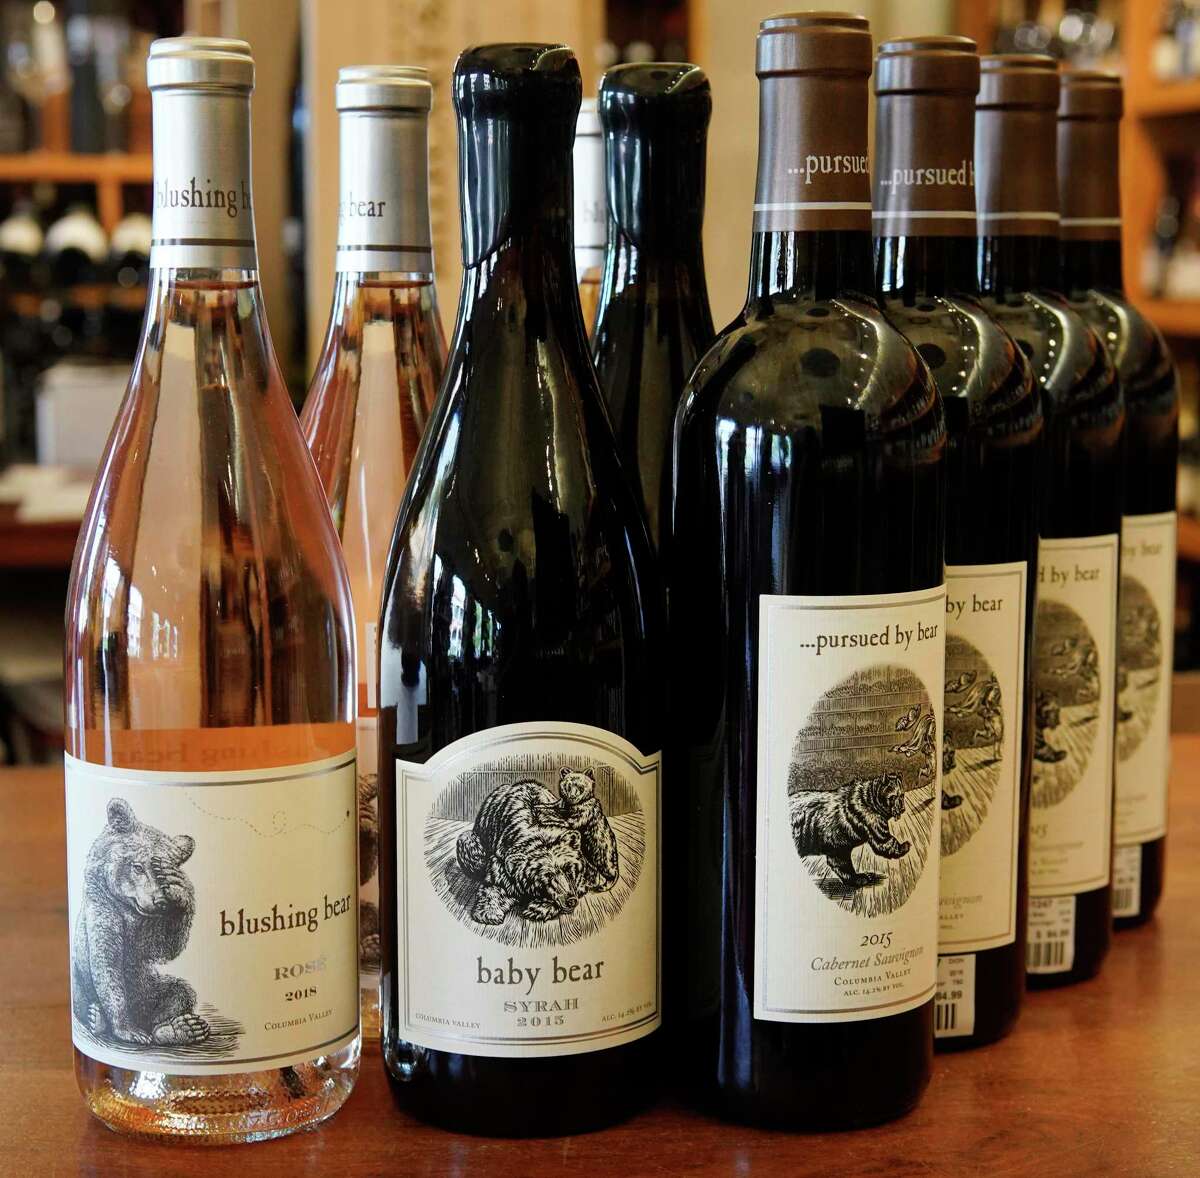 Houston Wine Merchant’s prices for Pursued by Bear wines are $35.99 for the rosé, $72.99 for the syrah and $84.99 for the cab.